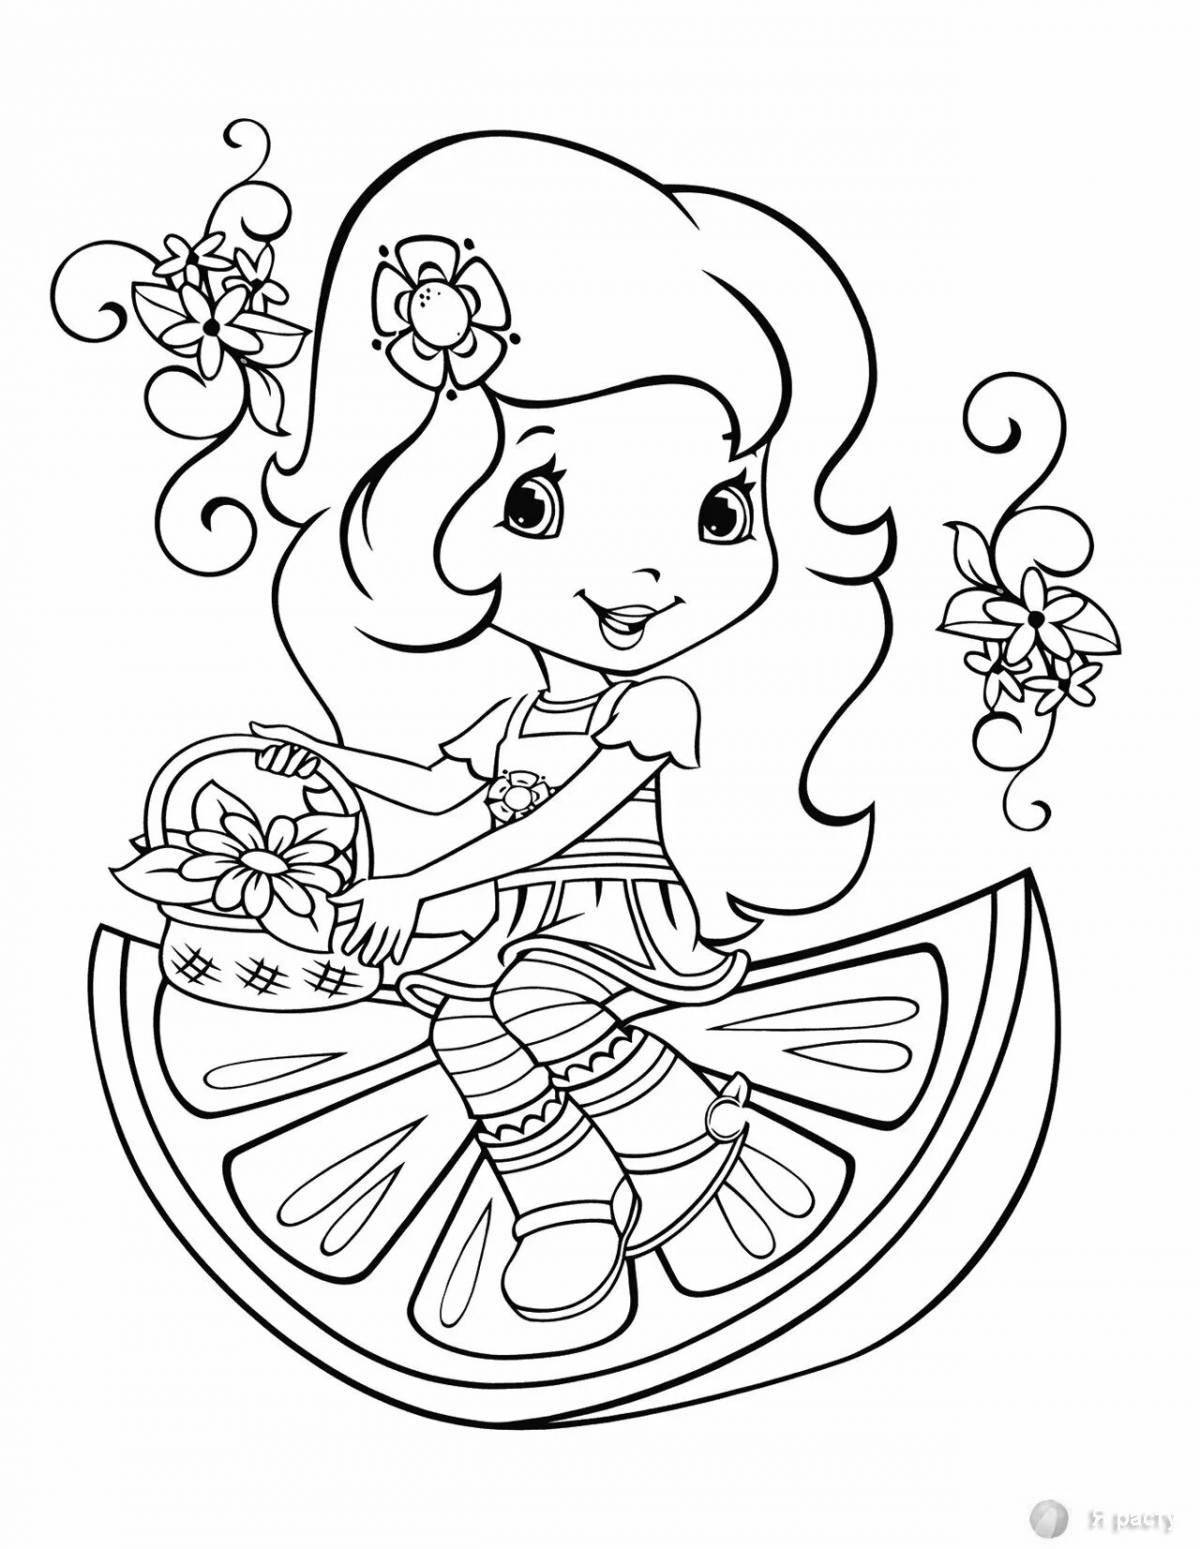 Fairy mystical coloring pages for kids